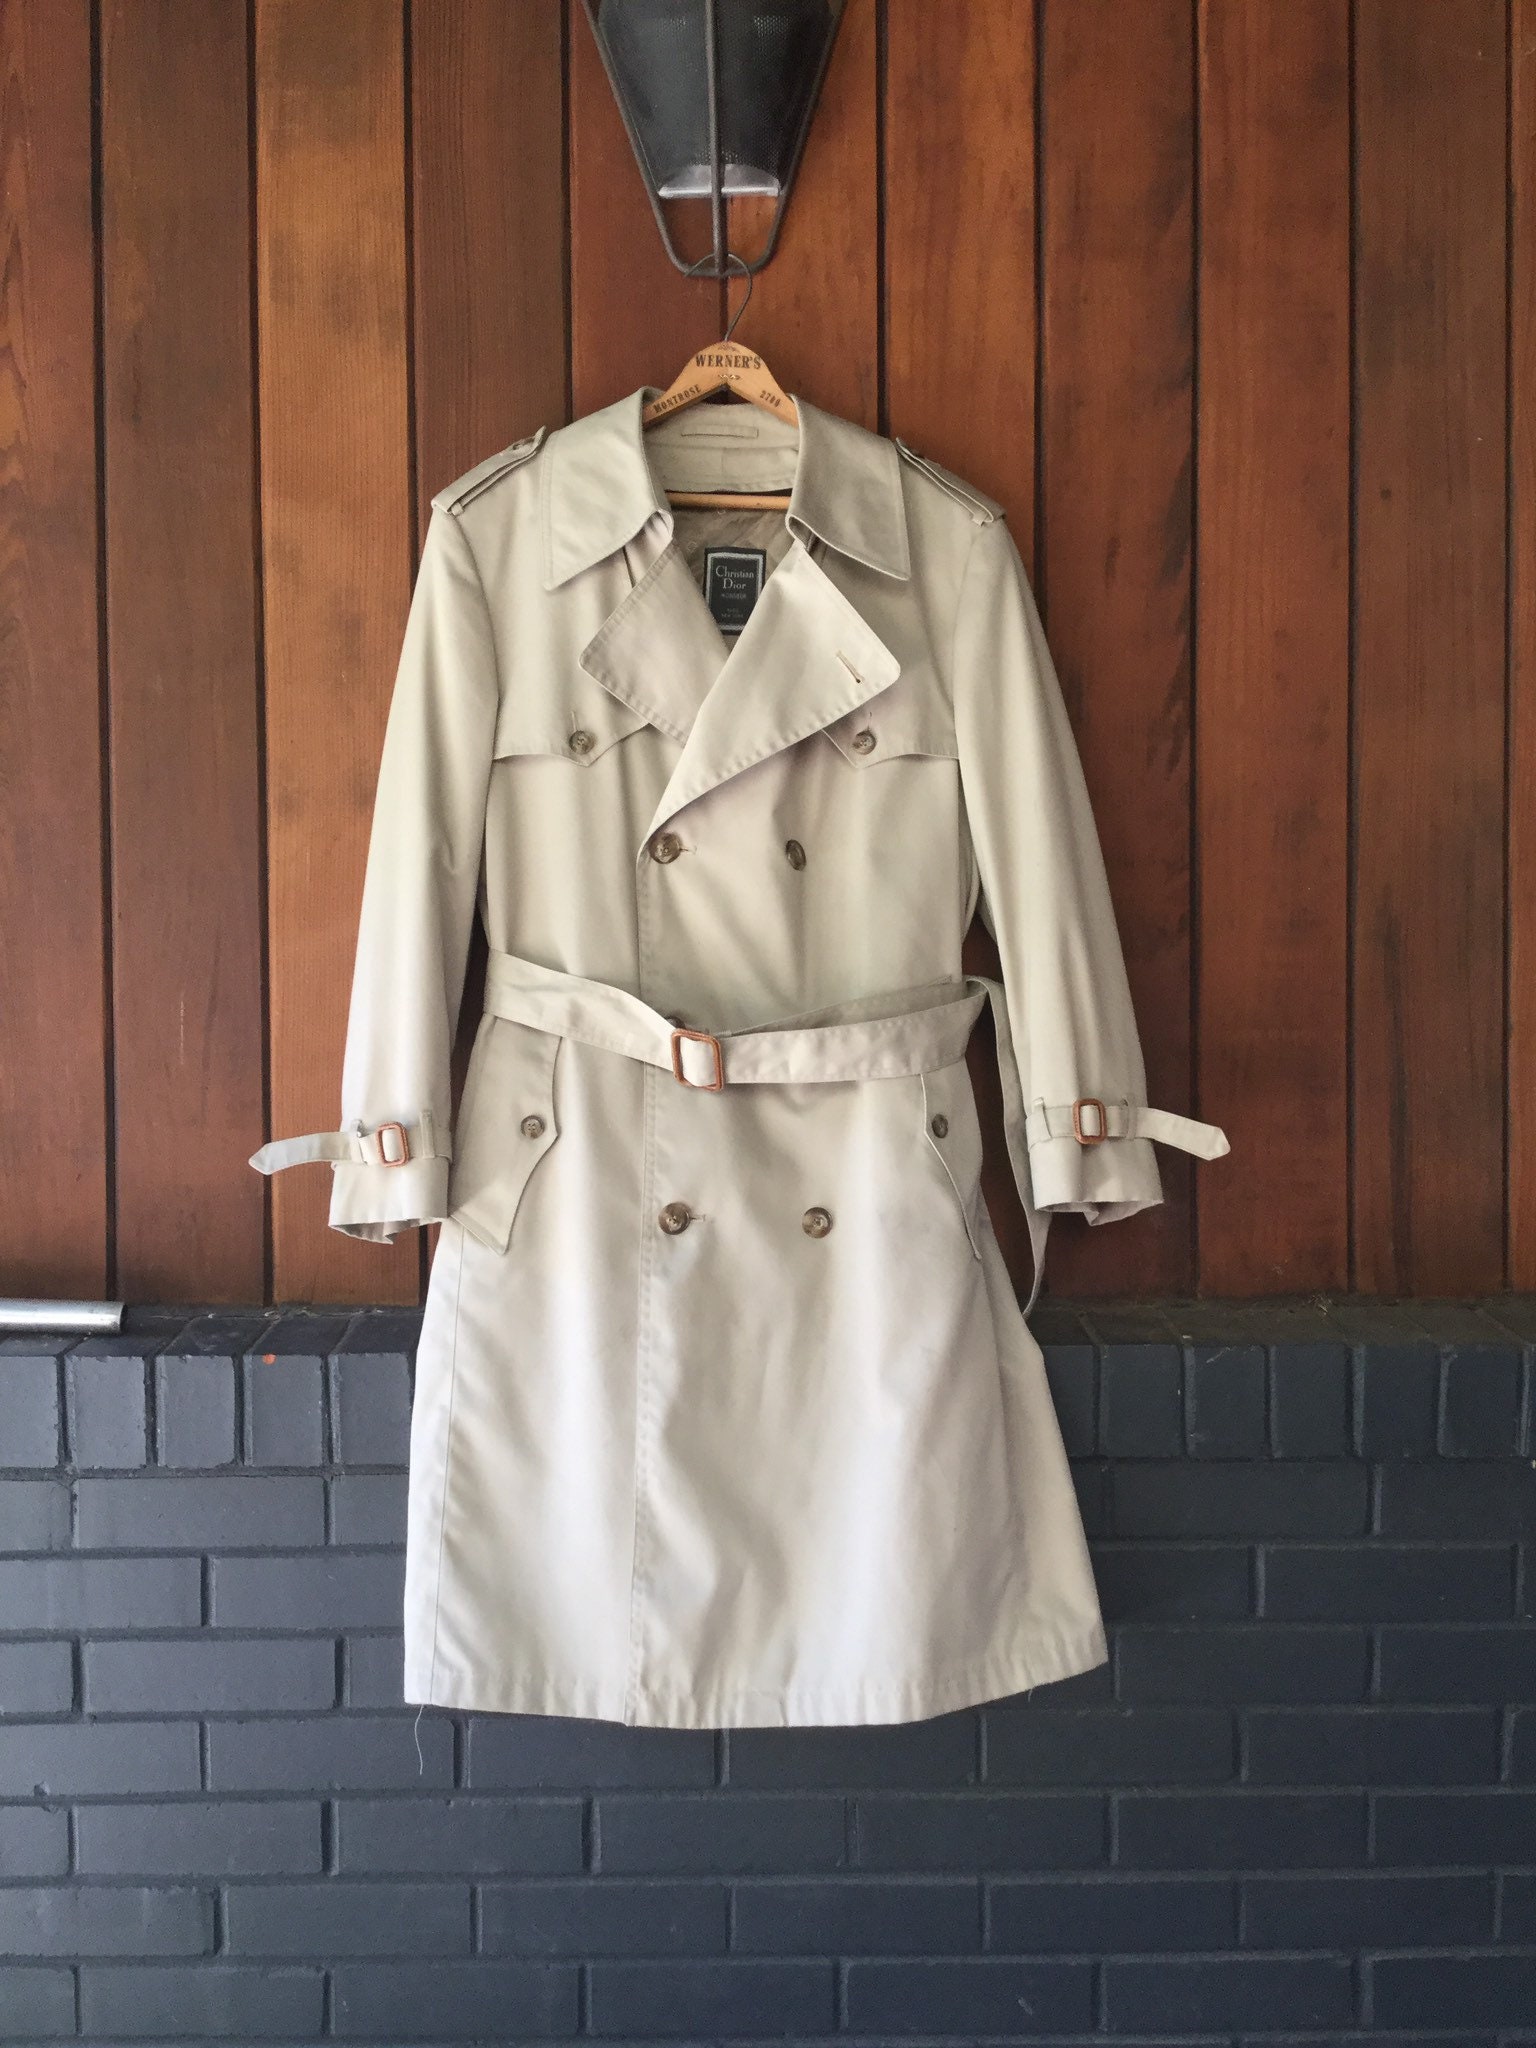 Christian Dior Trench Coat - Etsy